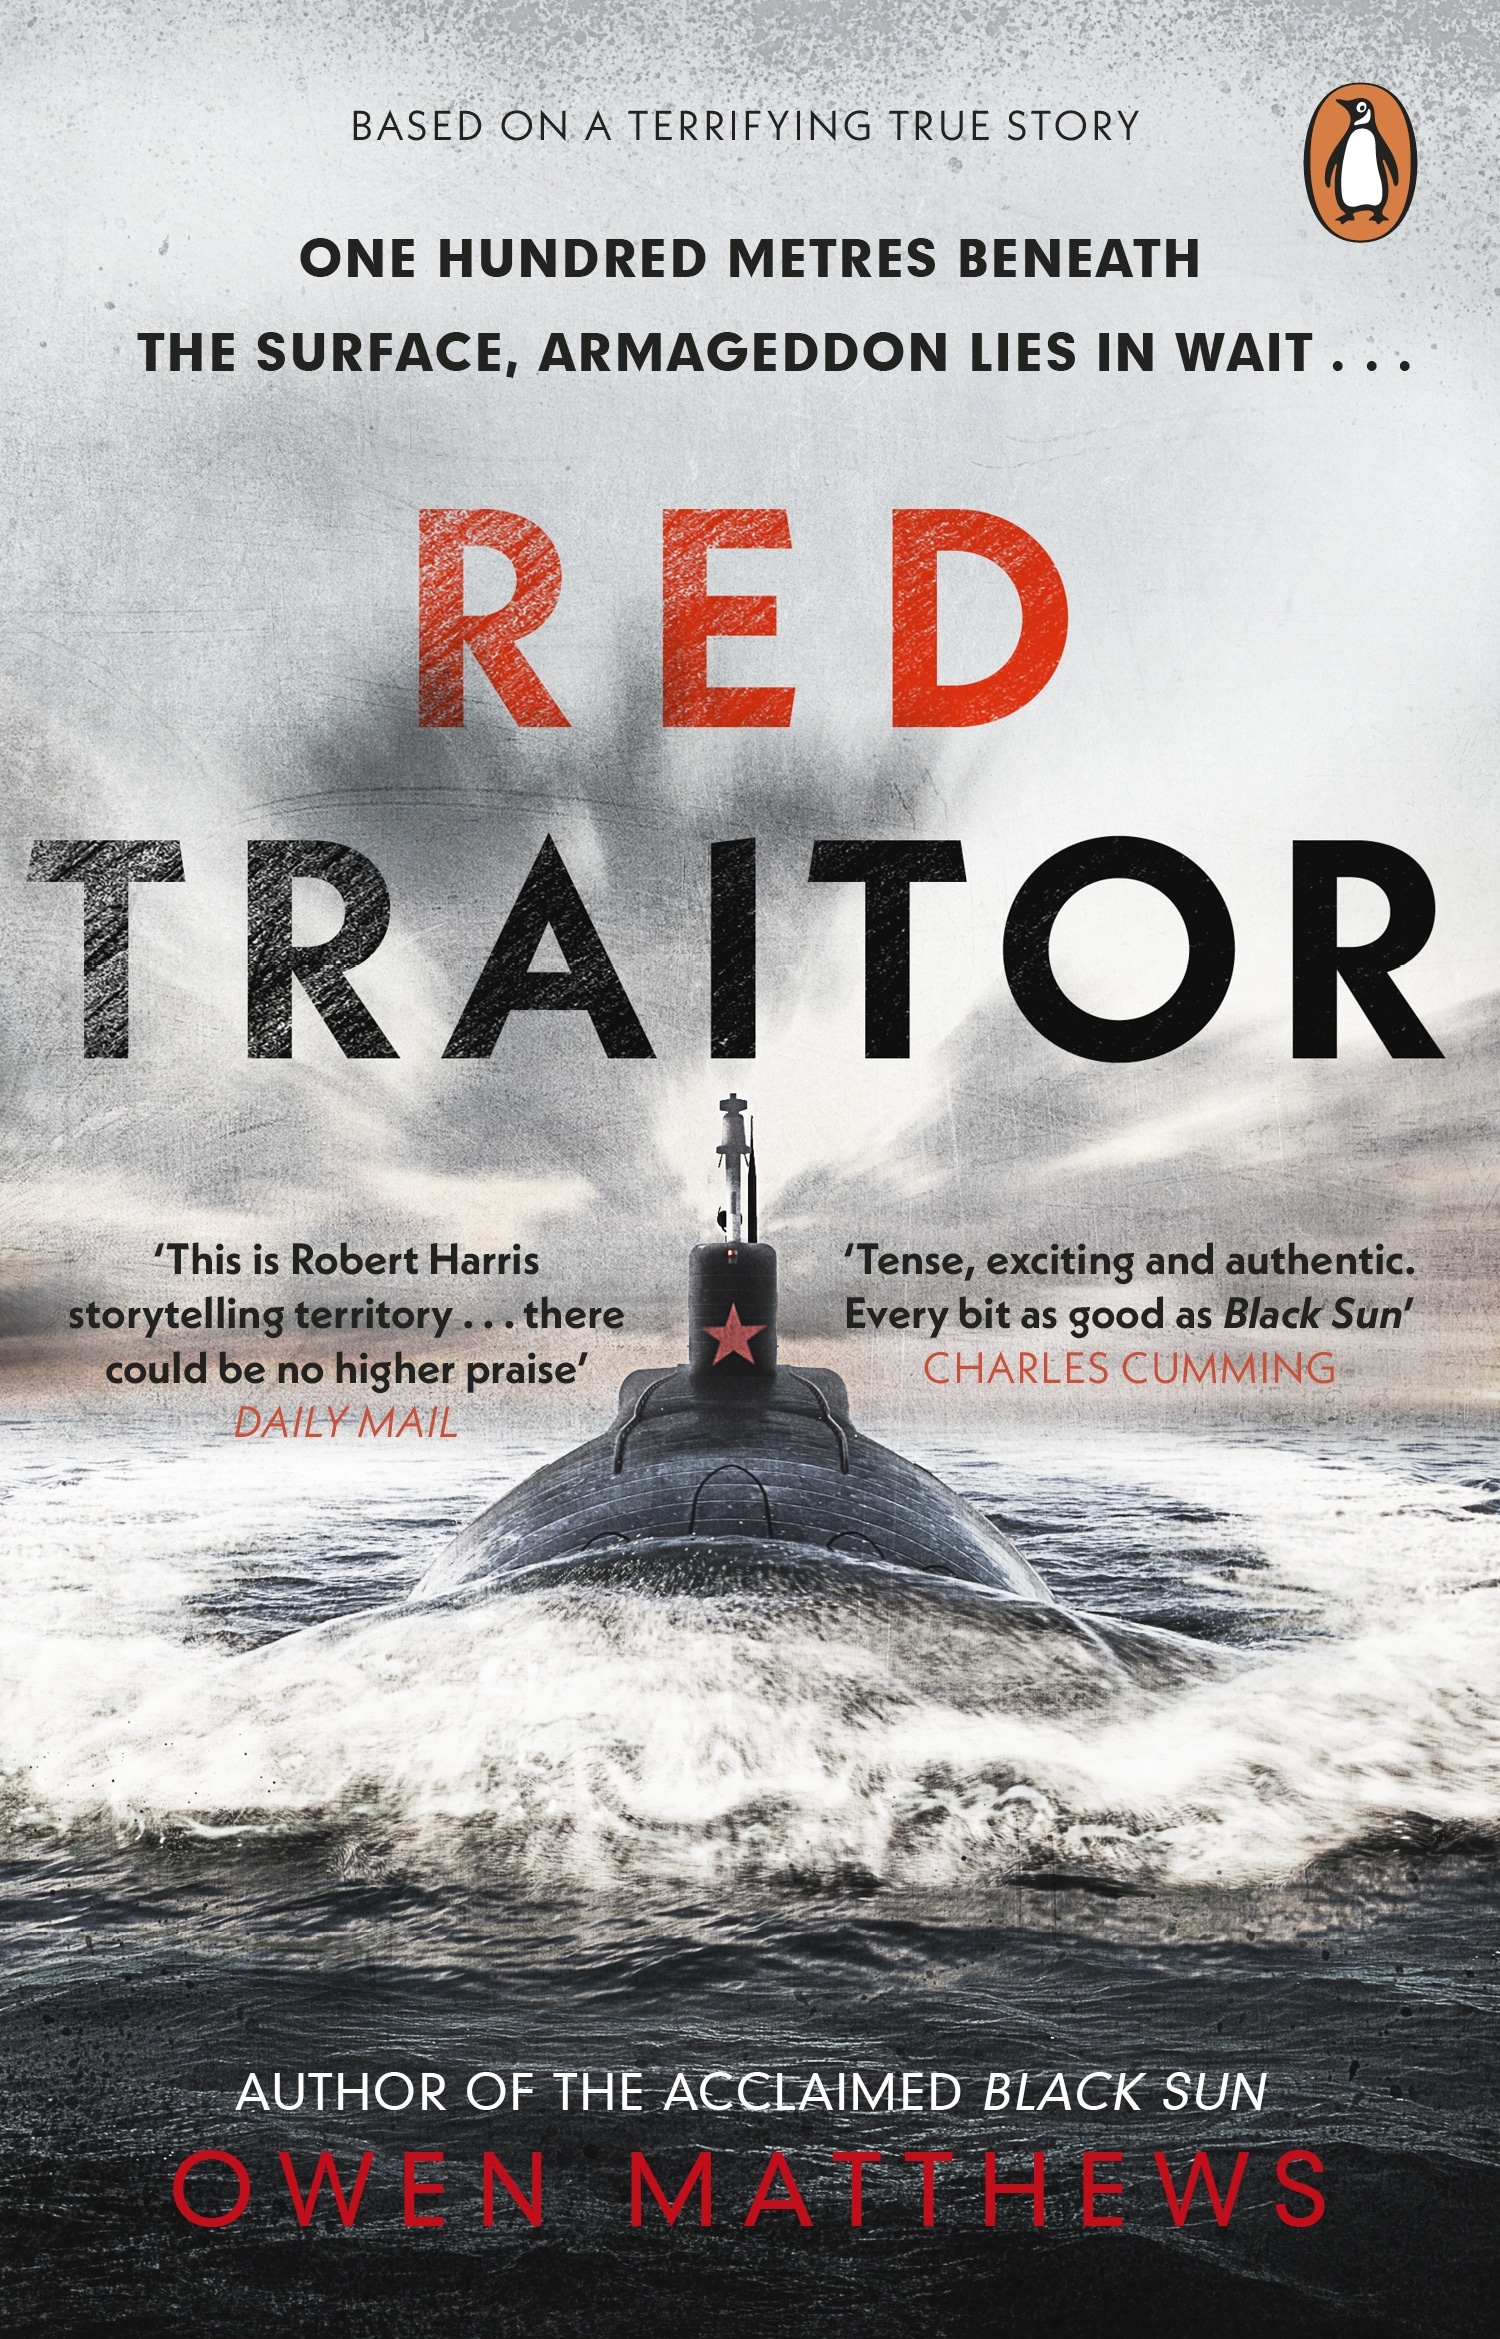 Book “Red Traitor” by Owen Matthews — May 26, 2022